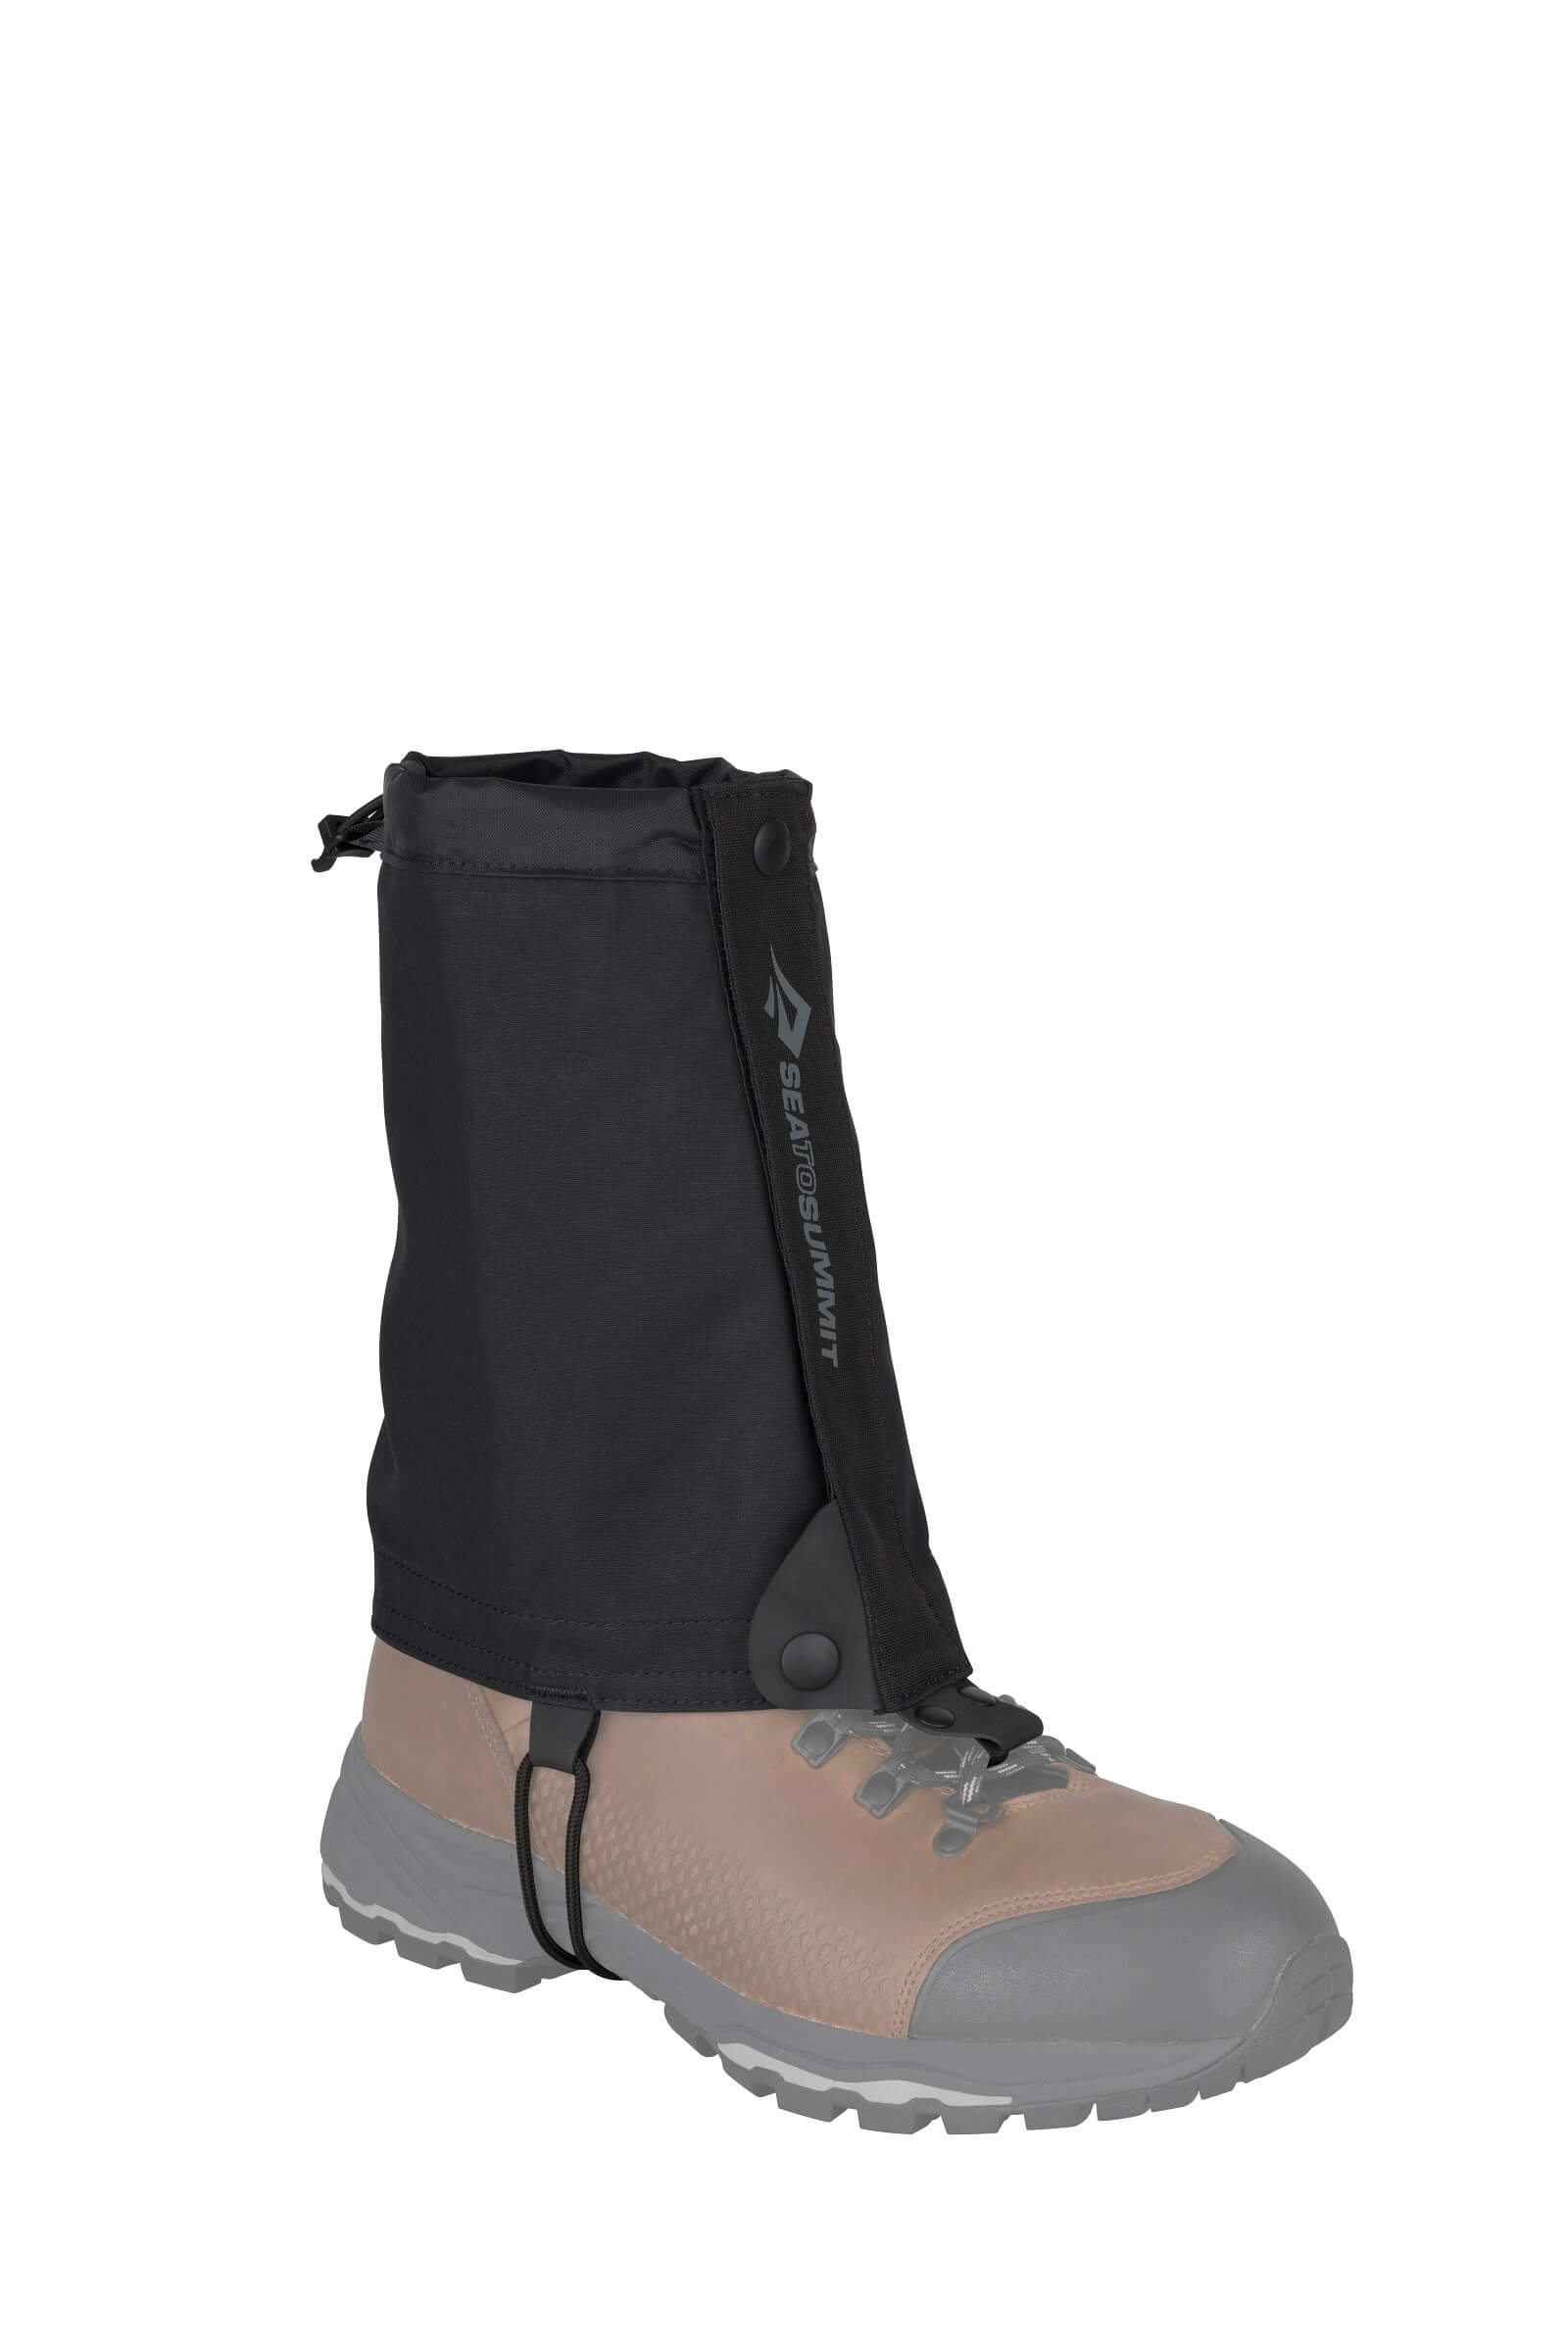 Sea To Summit Spinifex Ankle Gaiters Gamasche - Canvas